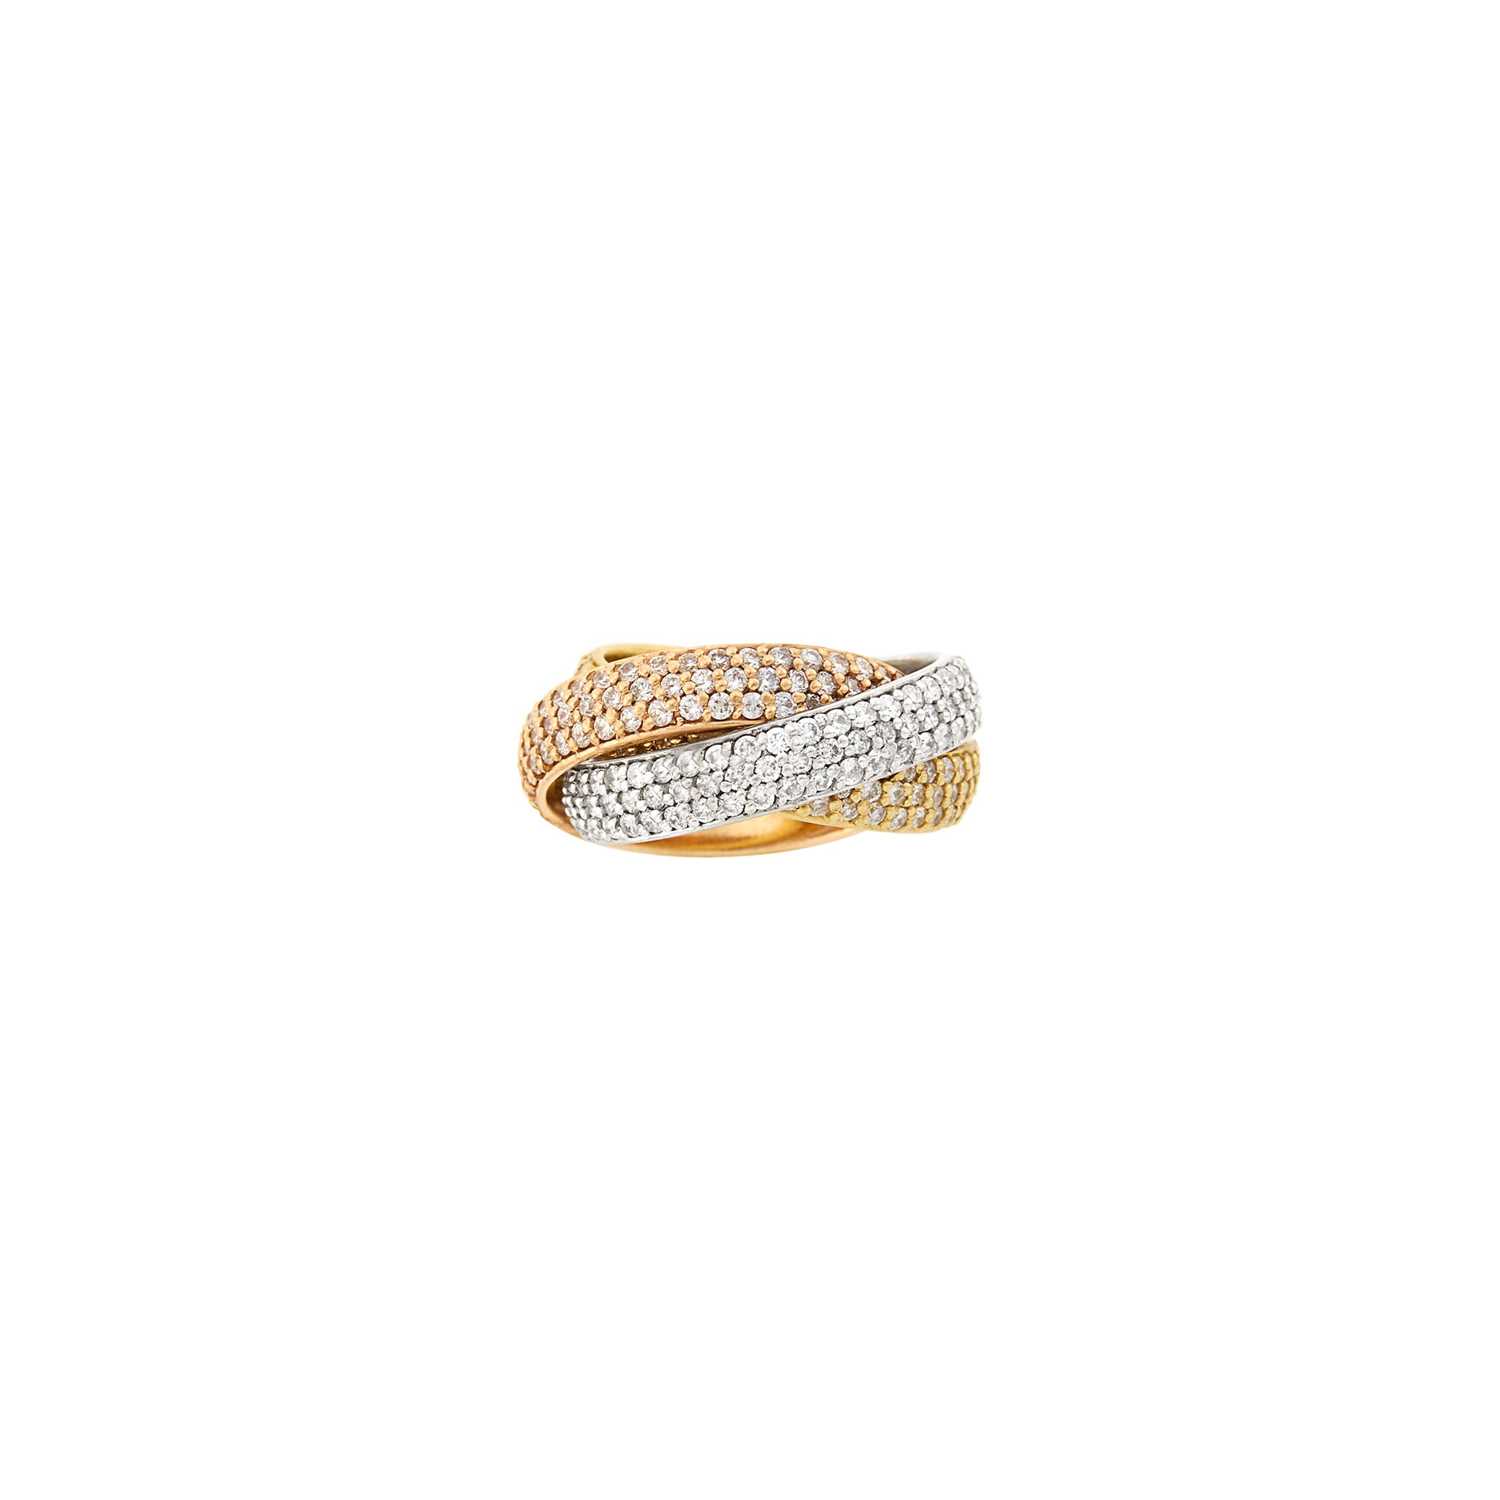 Lot 91 - Tricolor Gold and Diamond Rolling Band Ring